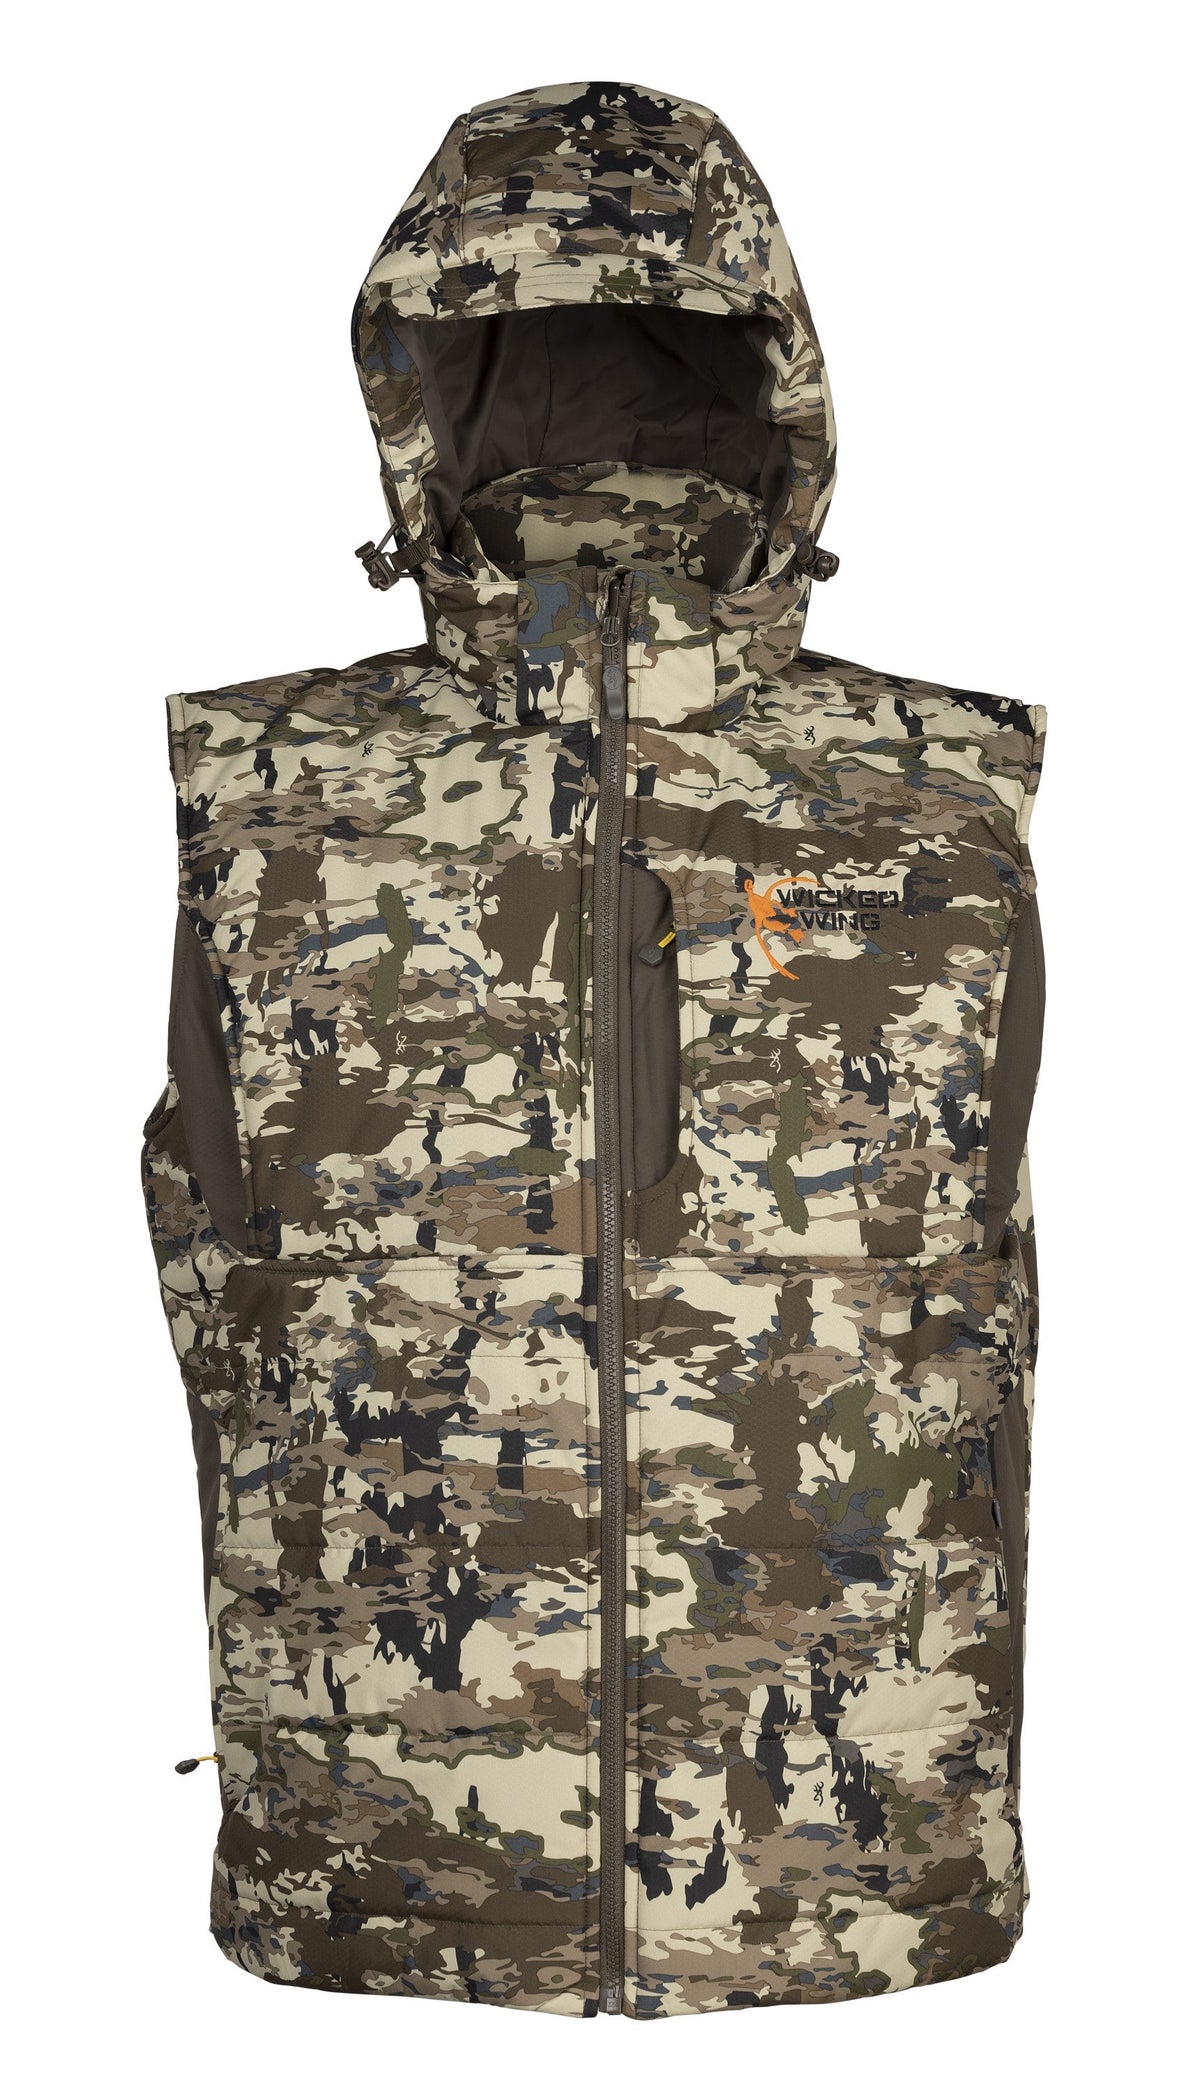 Insulated Vest